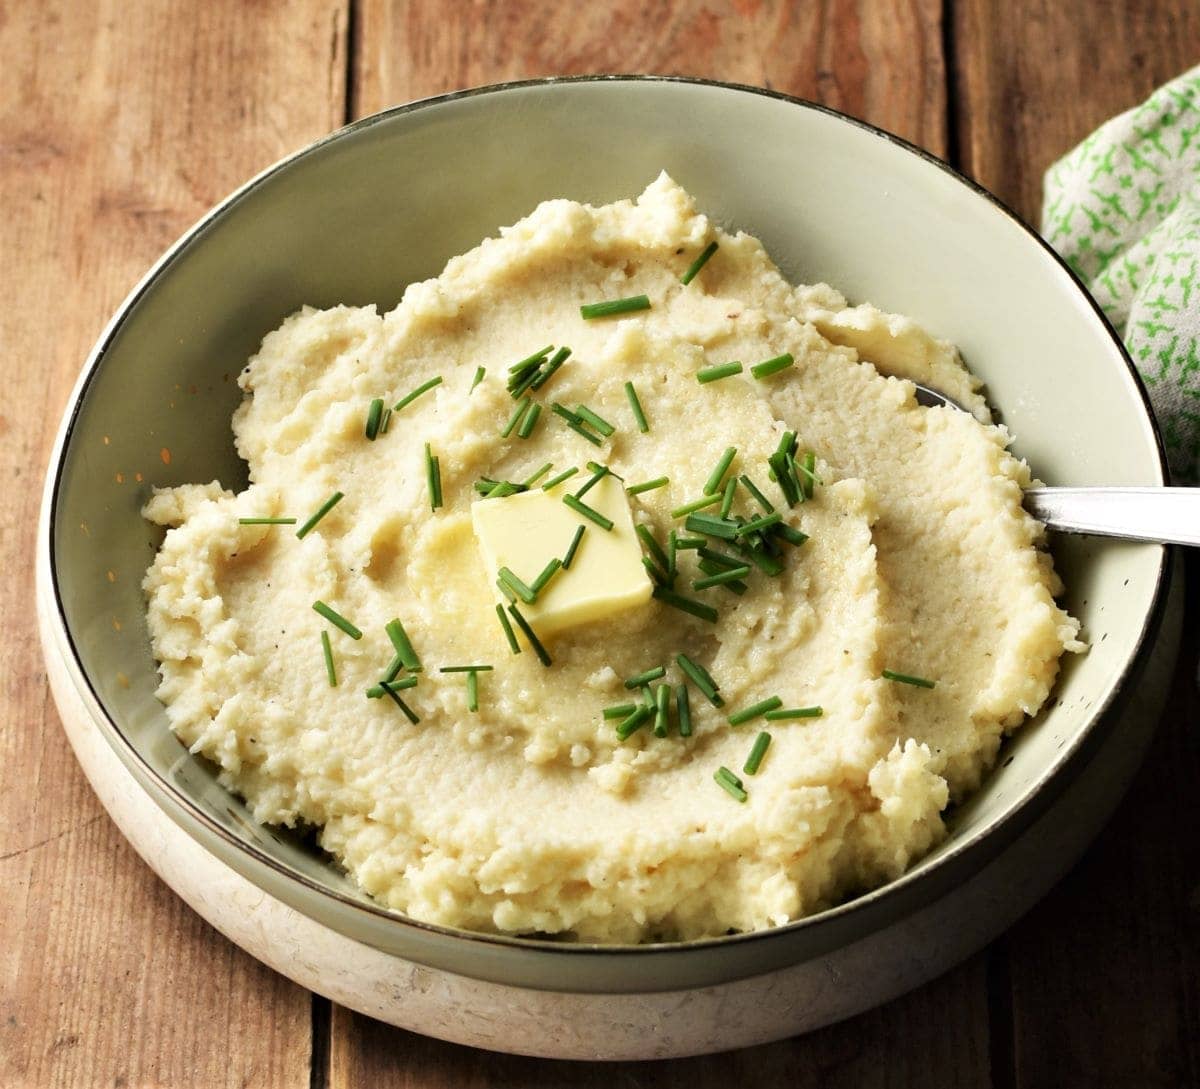 Side view of celery root puree with butter and chives in green bowl.